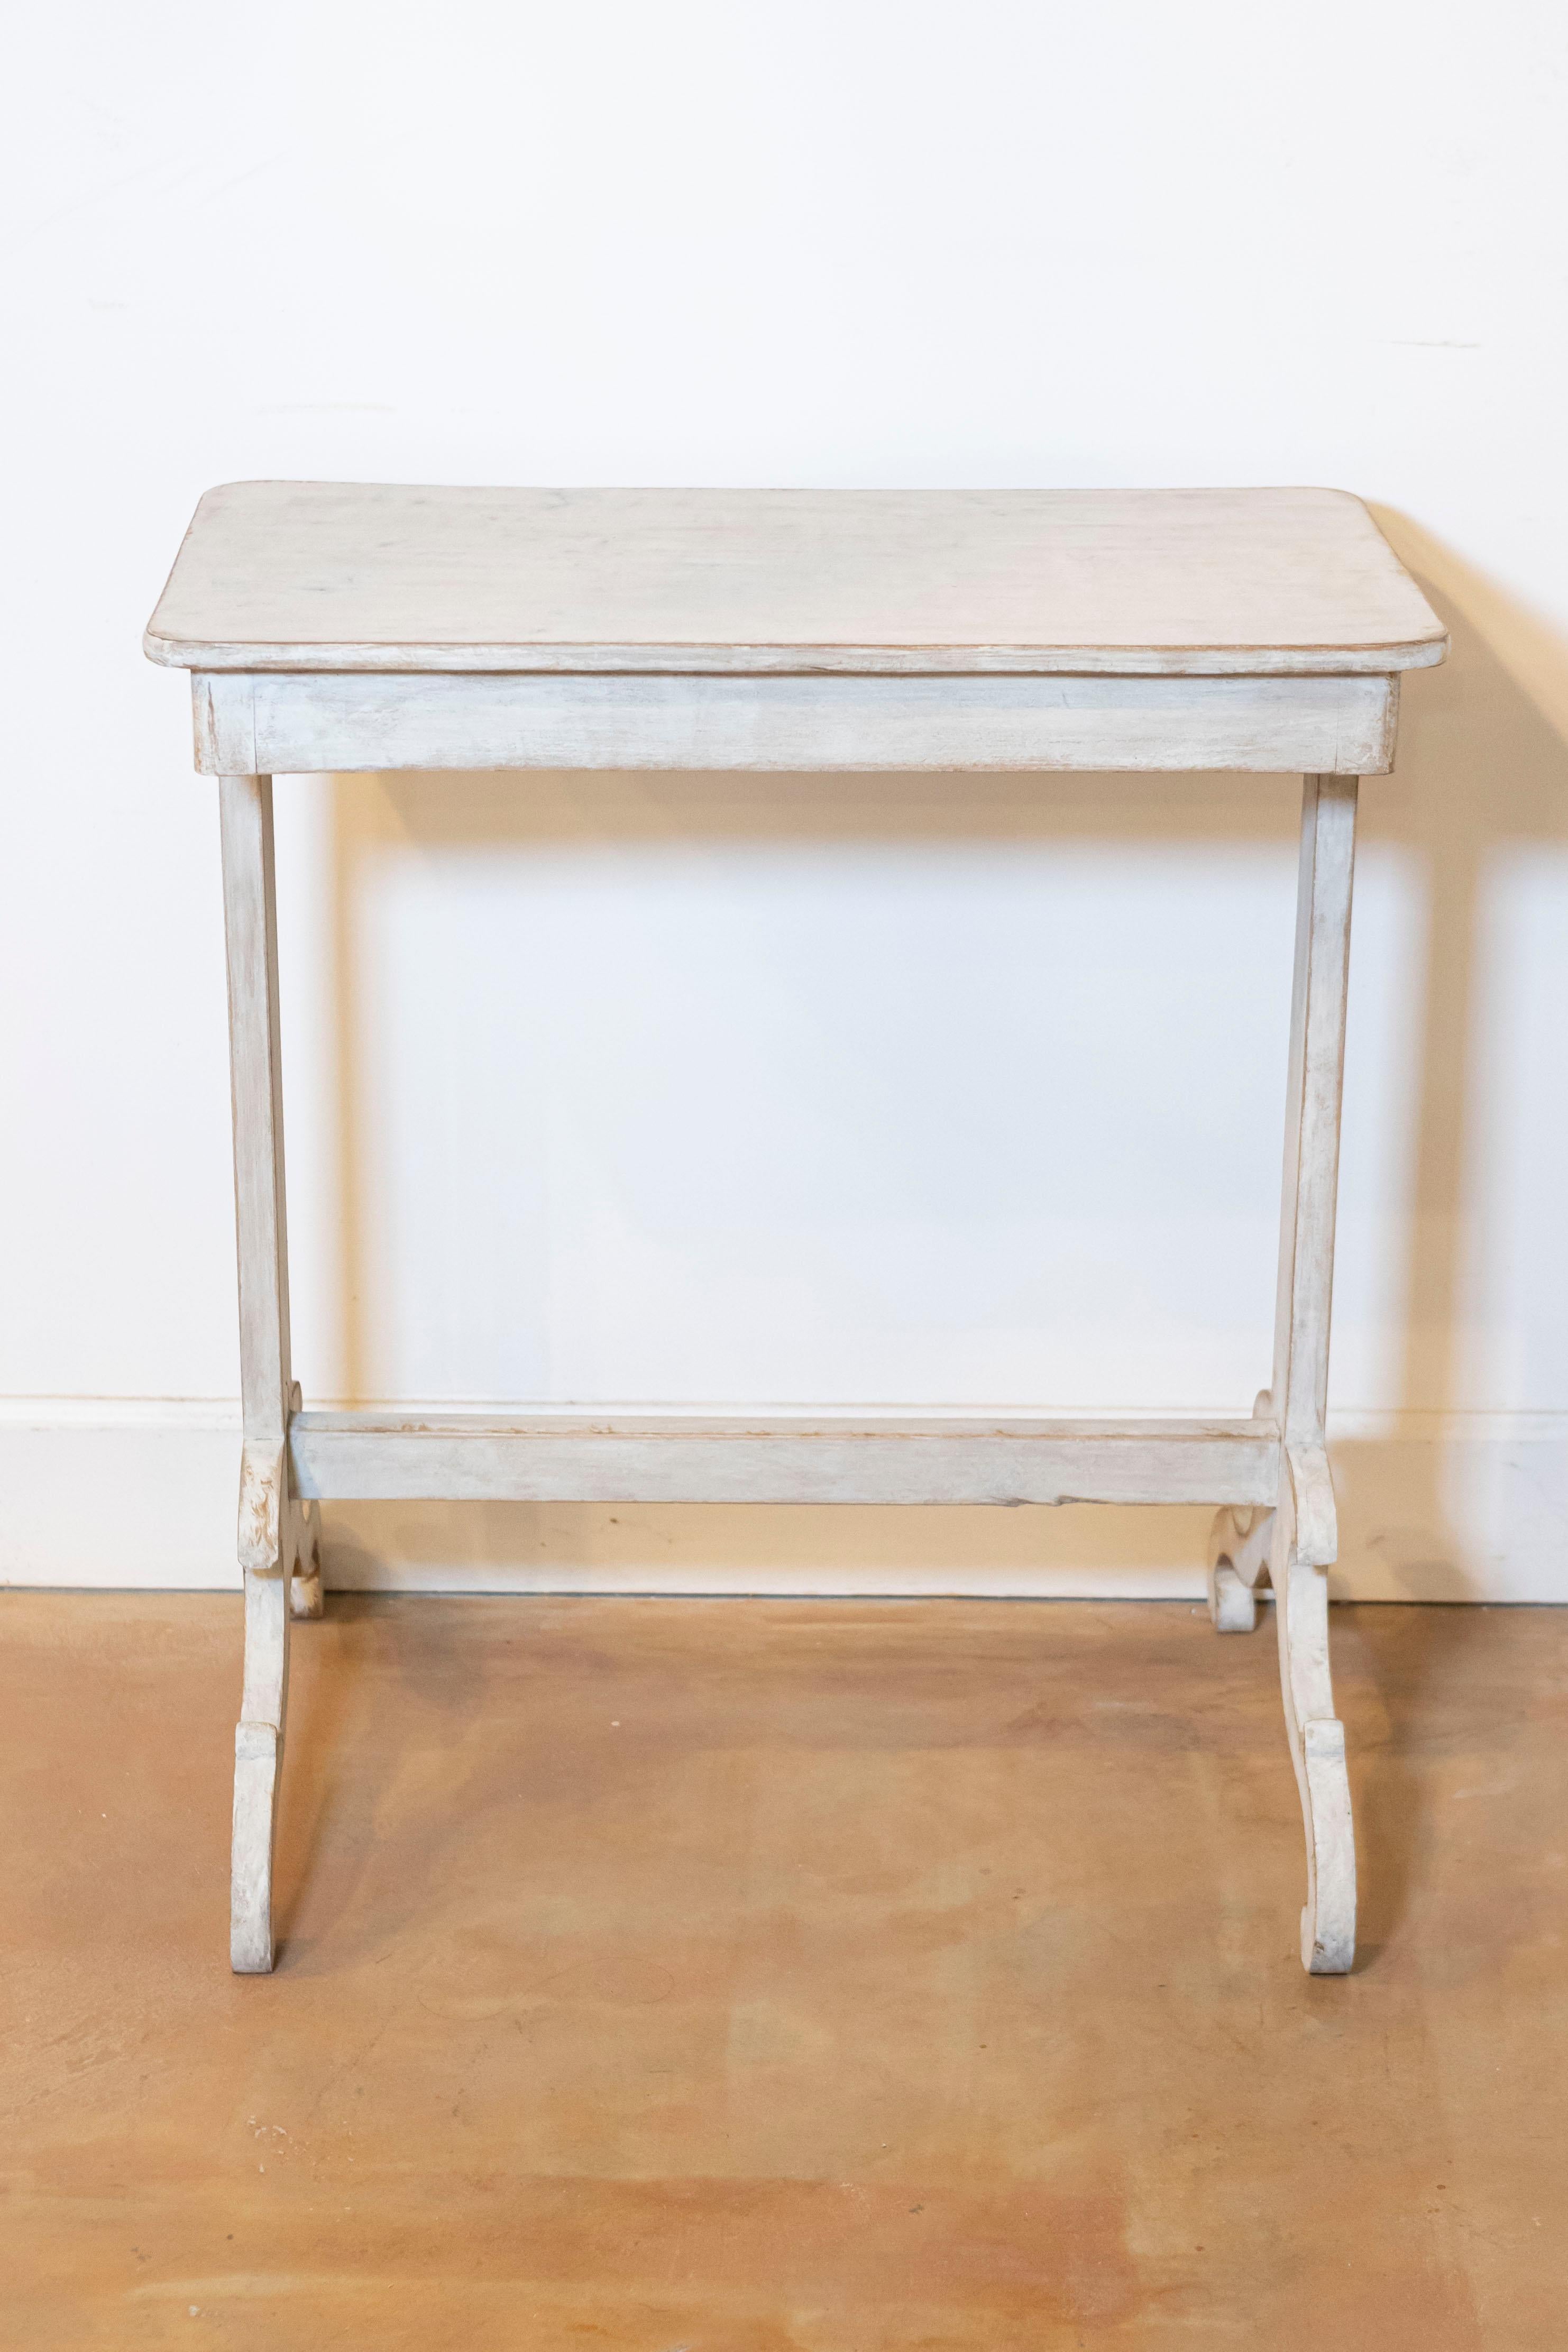 19th Century Swedish Light Gray Painted Side Table with Carved Trestle Base For Sale 2